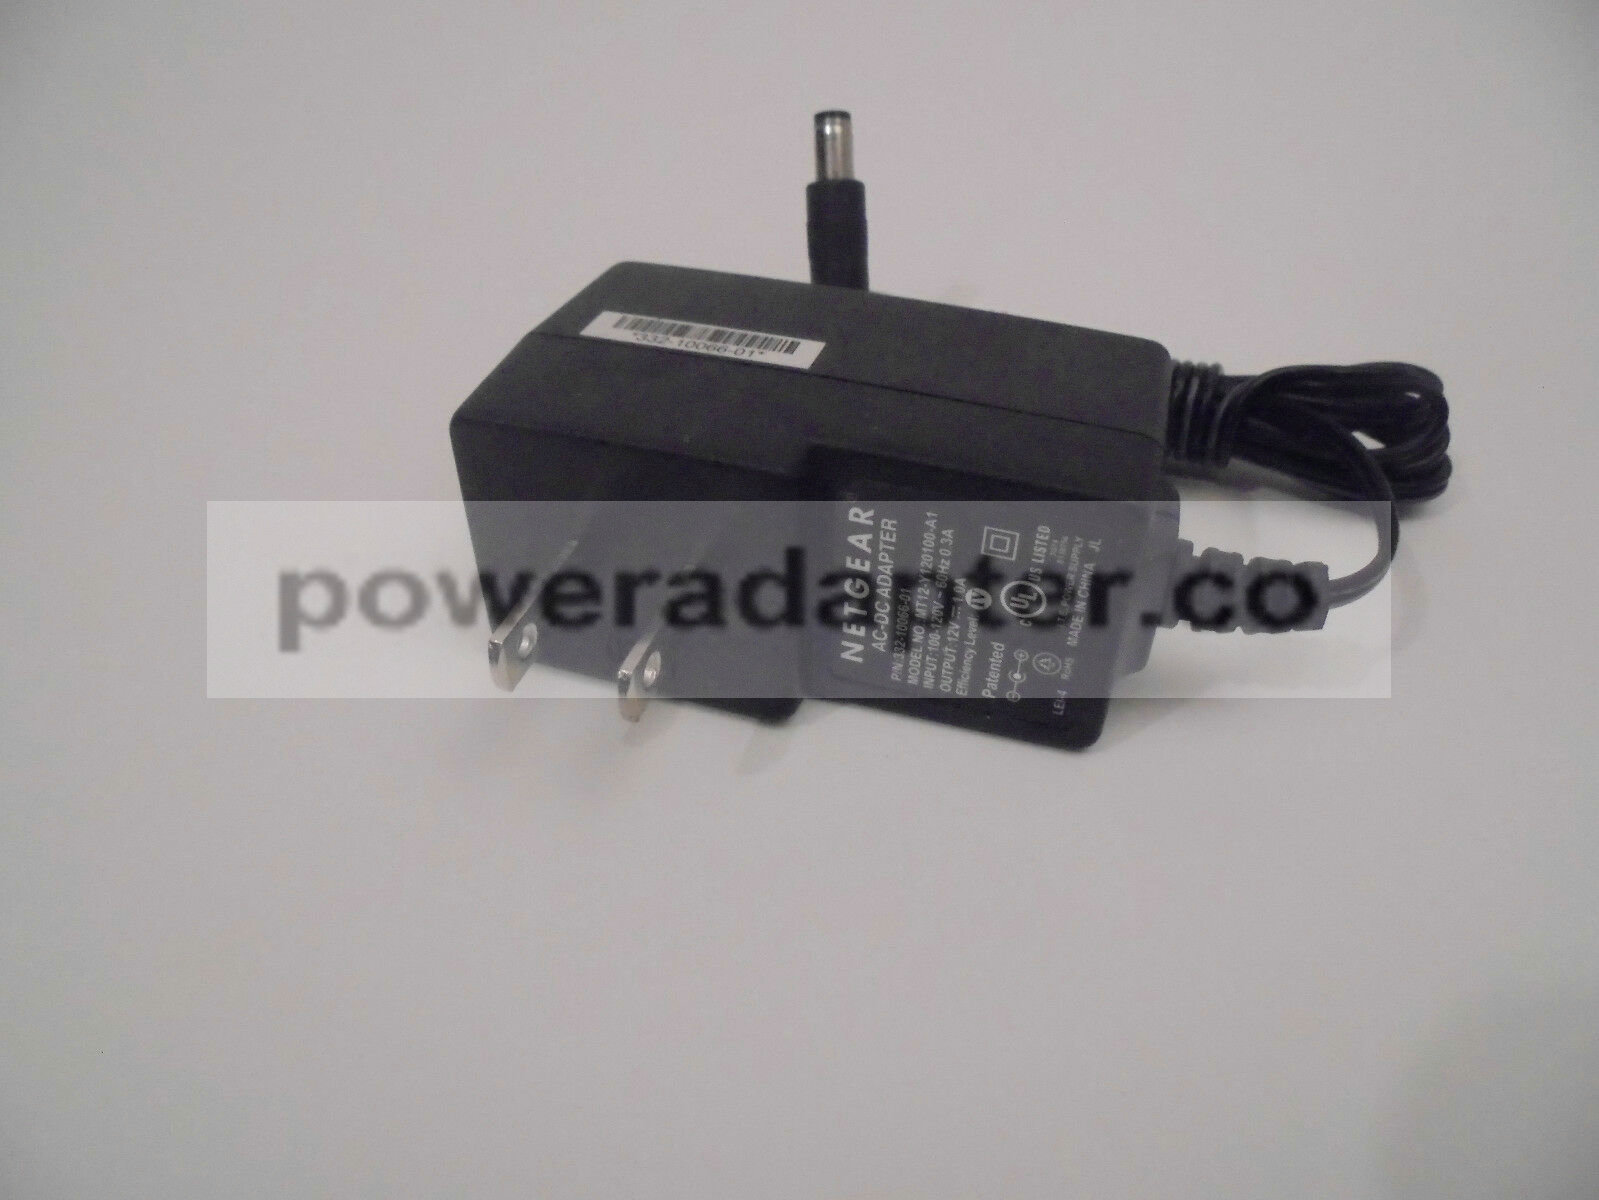 Netgear 332-10166-01 AC-DC Adapter MT12-Y120100-A1 Condition: new Country/Region of Manufacture: China Brand: Netgea - Click Image to Close